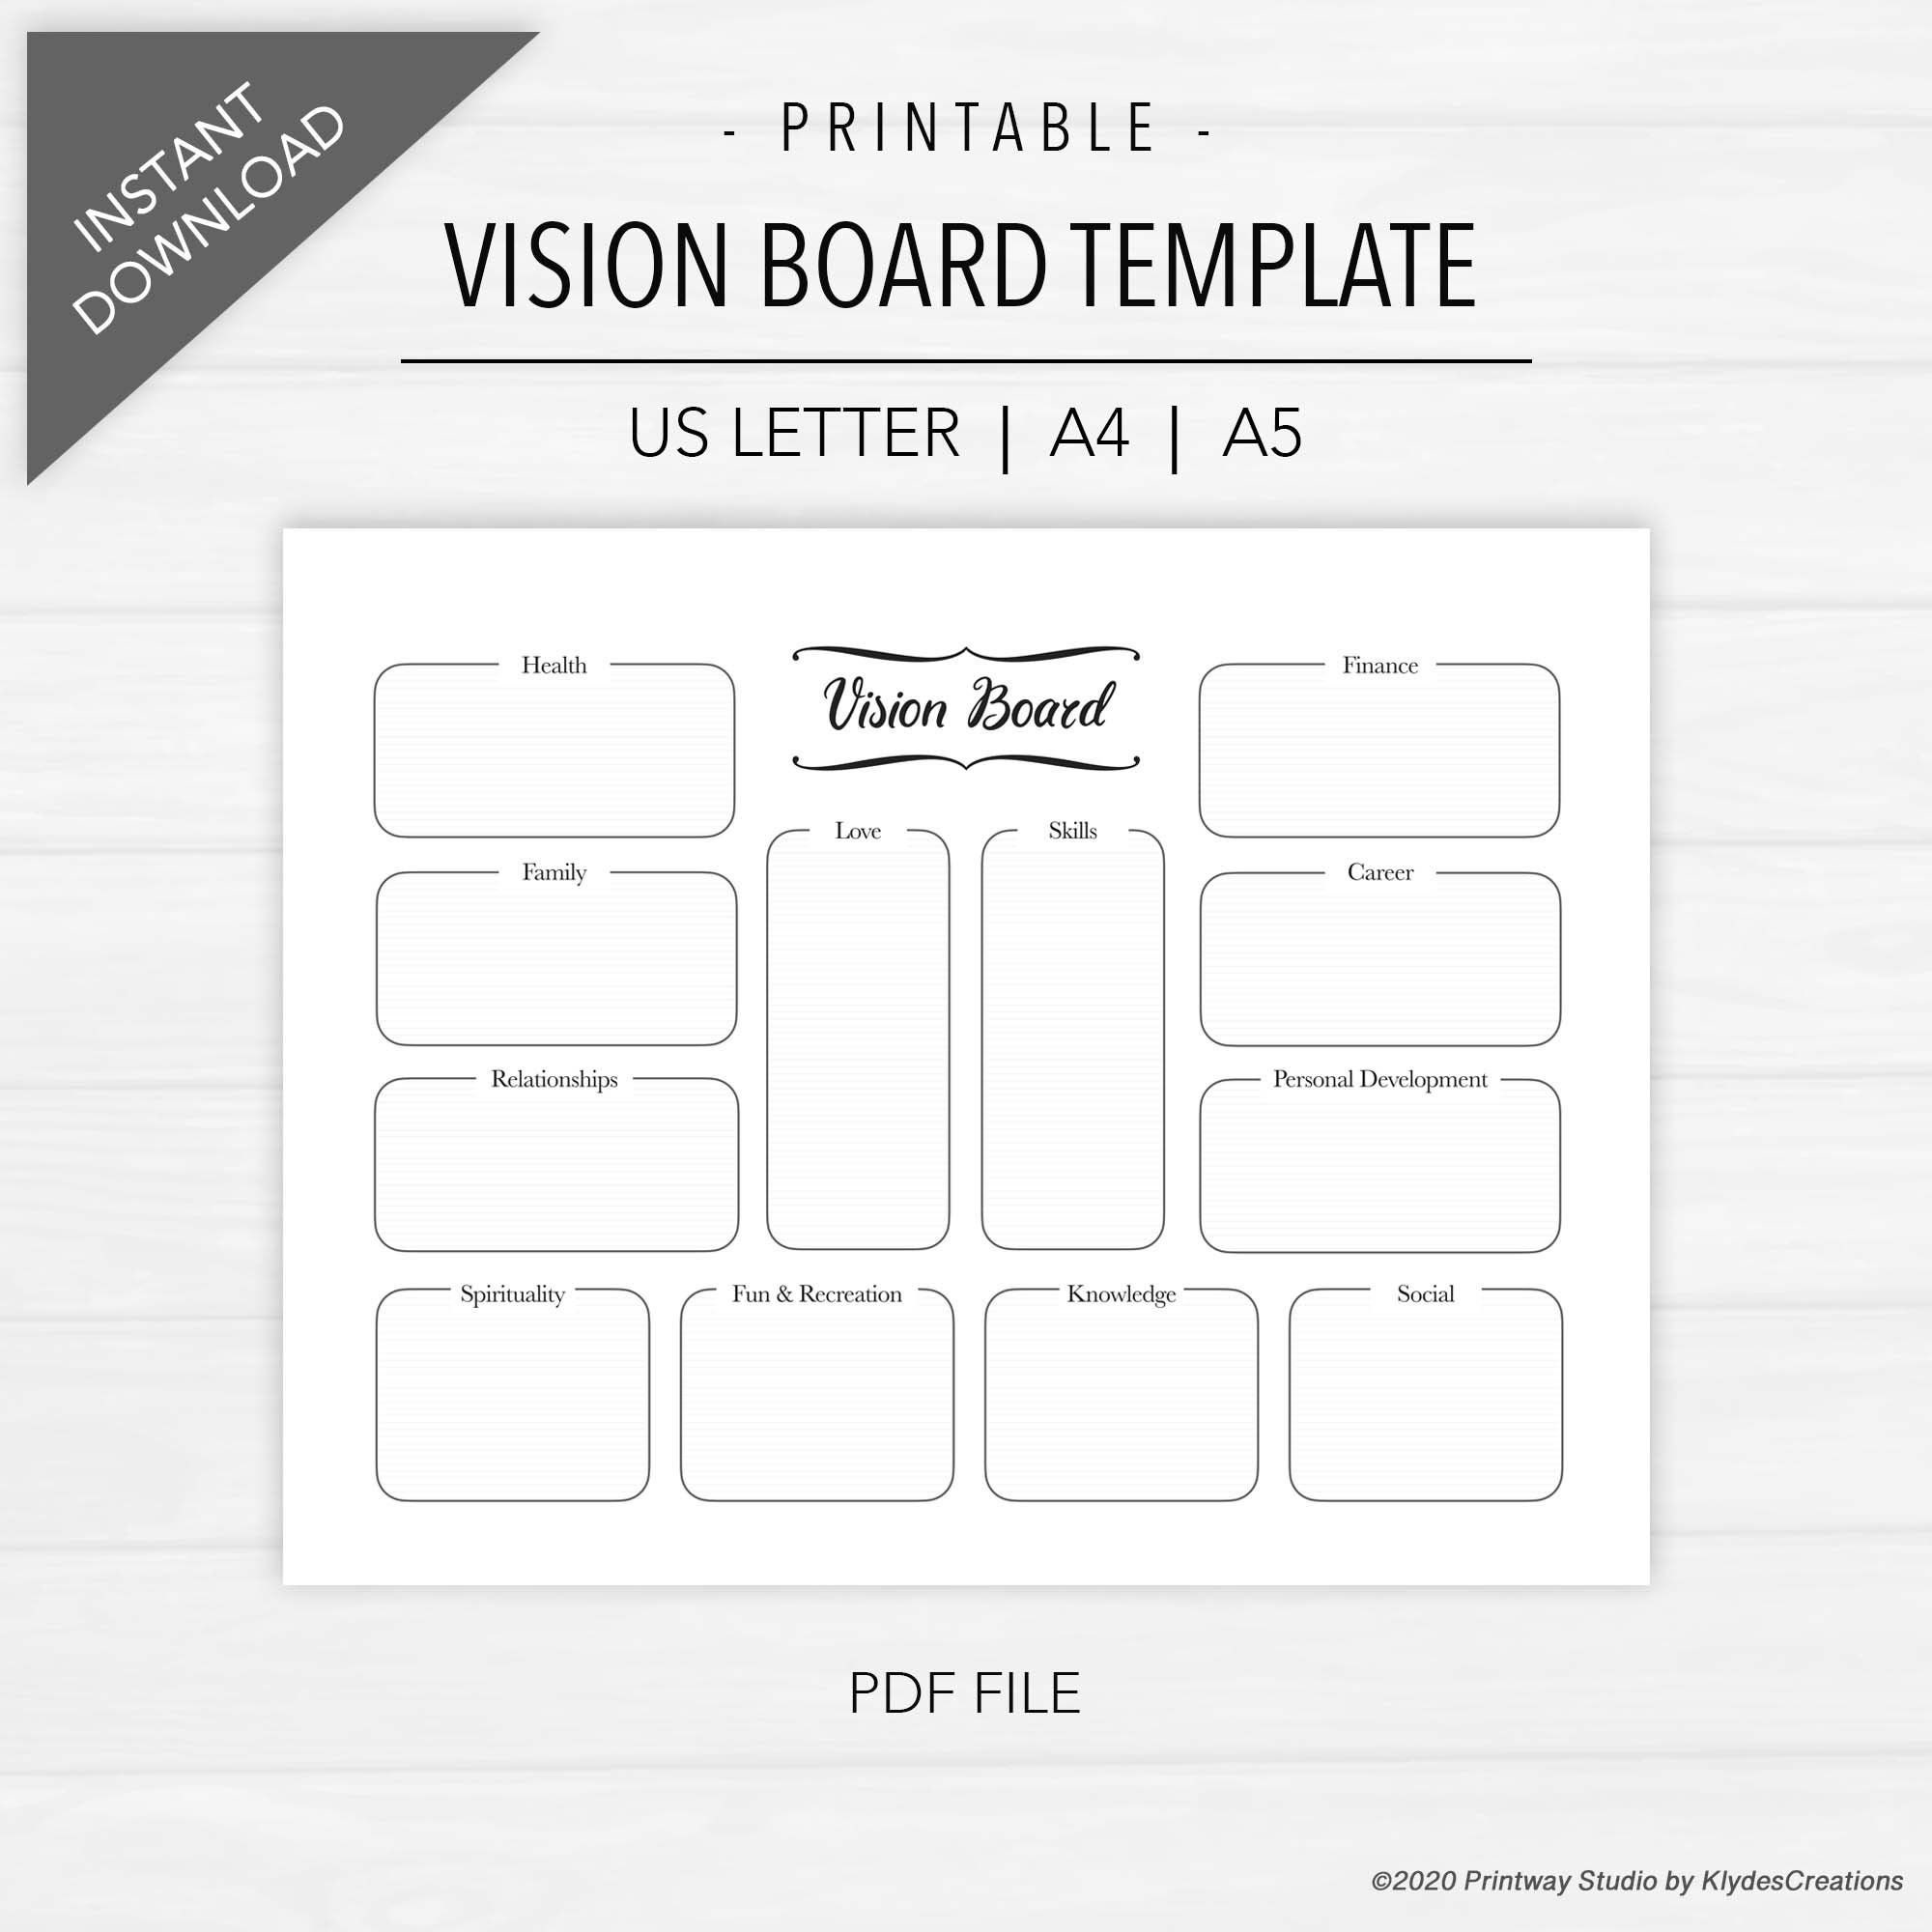 Create Your Own Vision Board Book and Sell it on  Templates